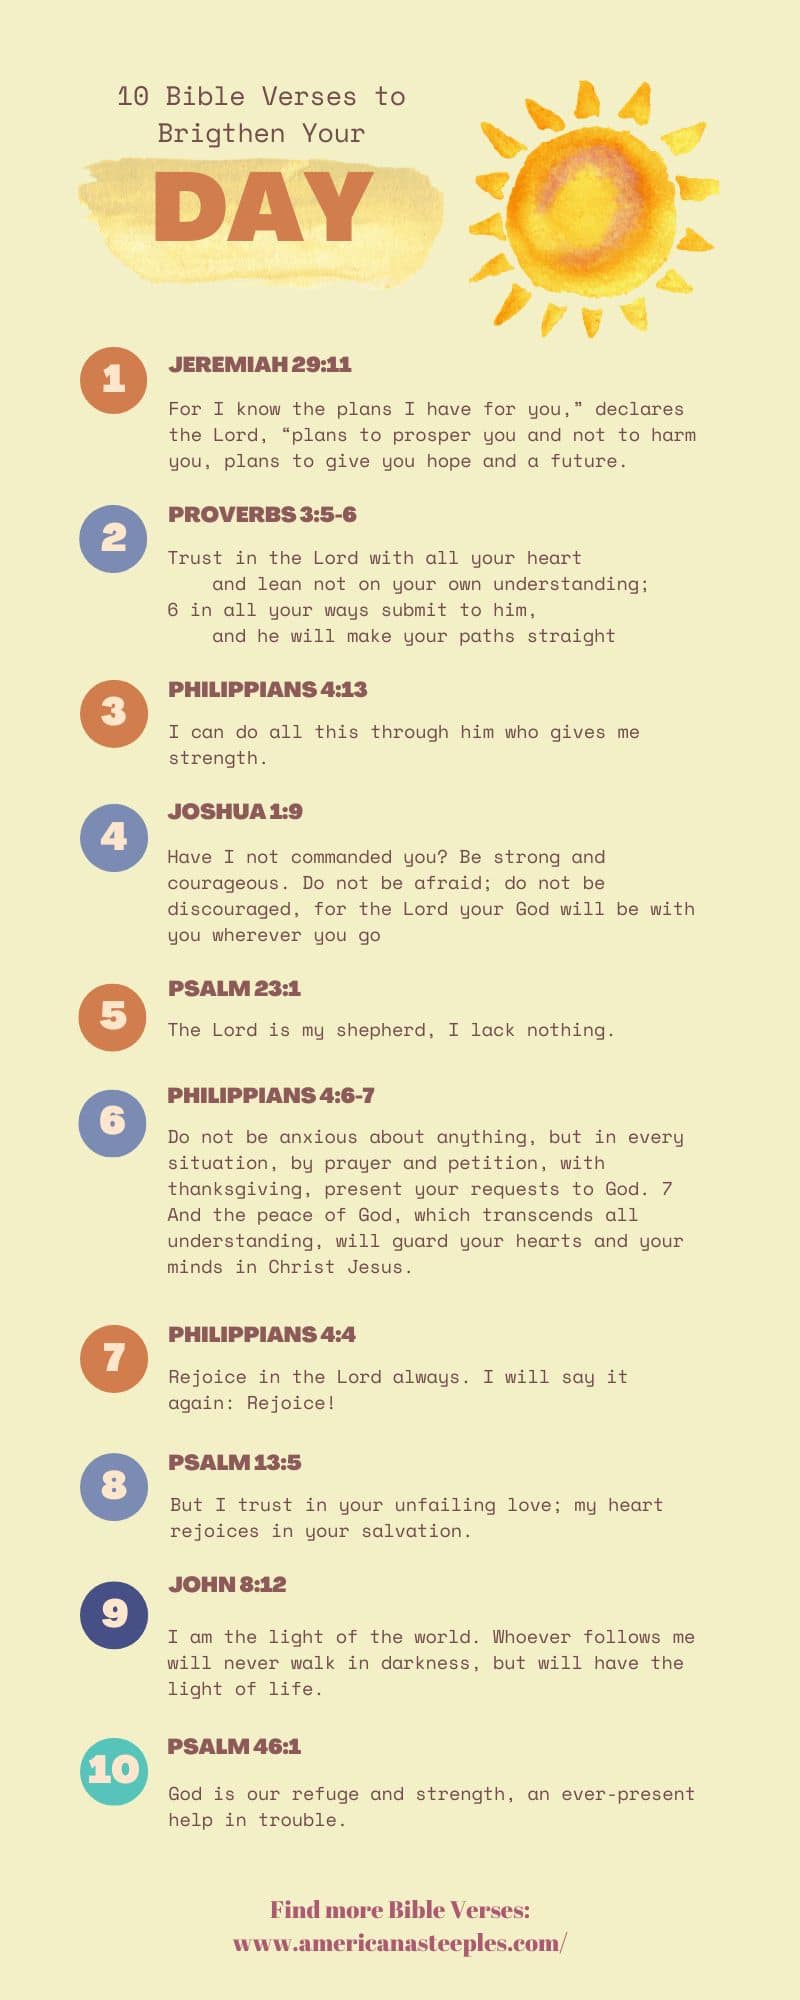 infographic of 10 bible verses to brighten the day